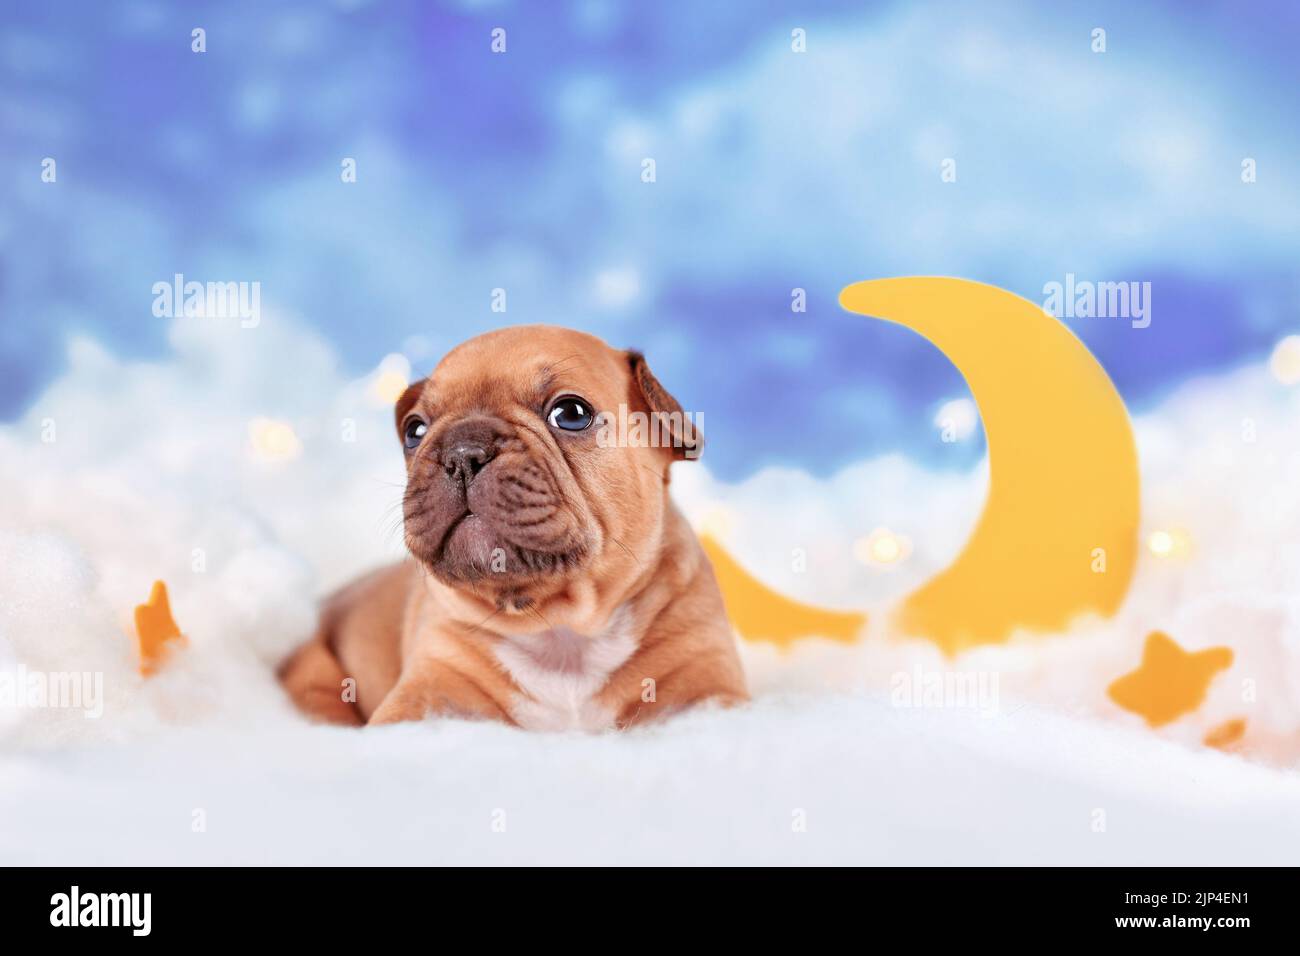 Red fawn French Bulldog dog puppy between fluffy clouds with moon and stars Stock Photo